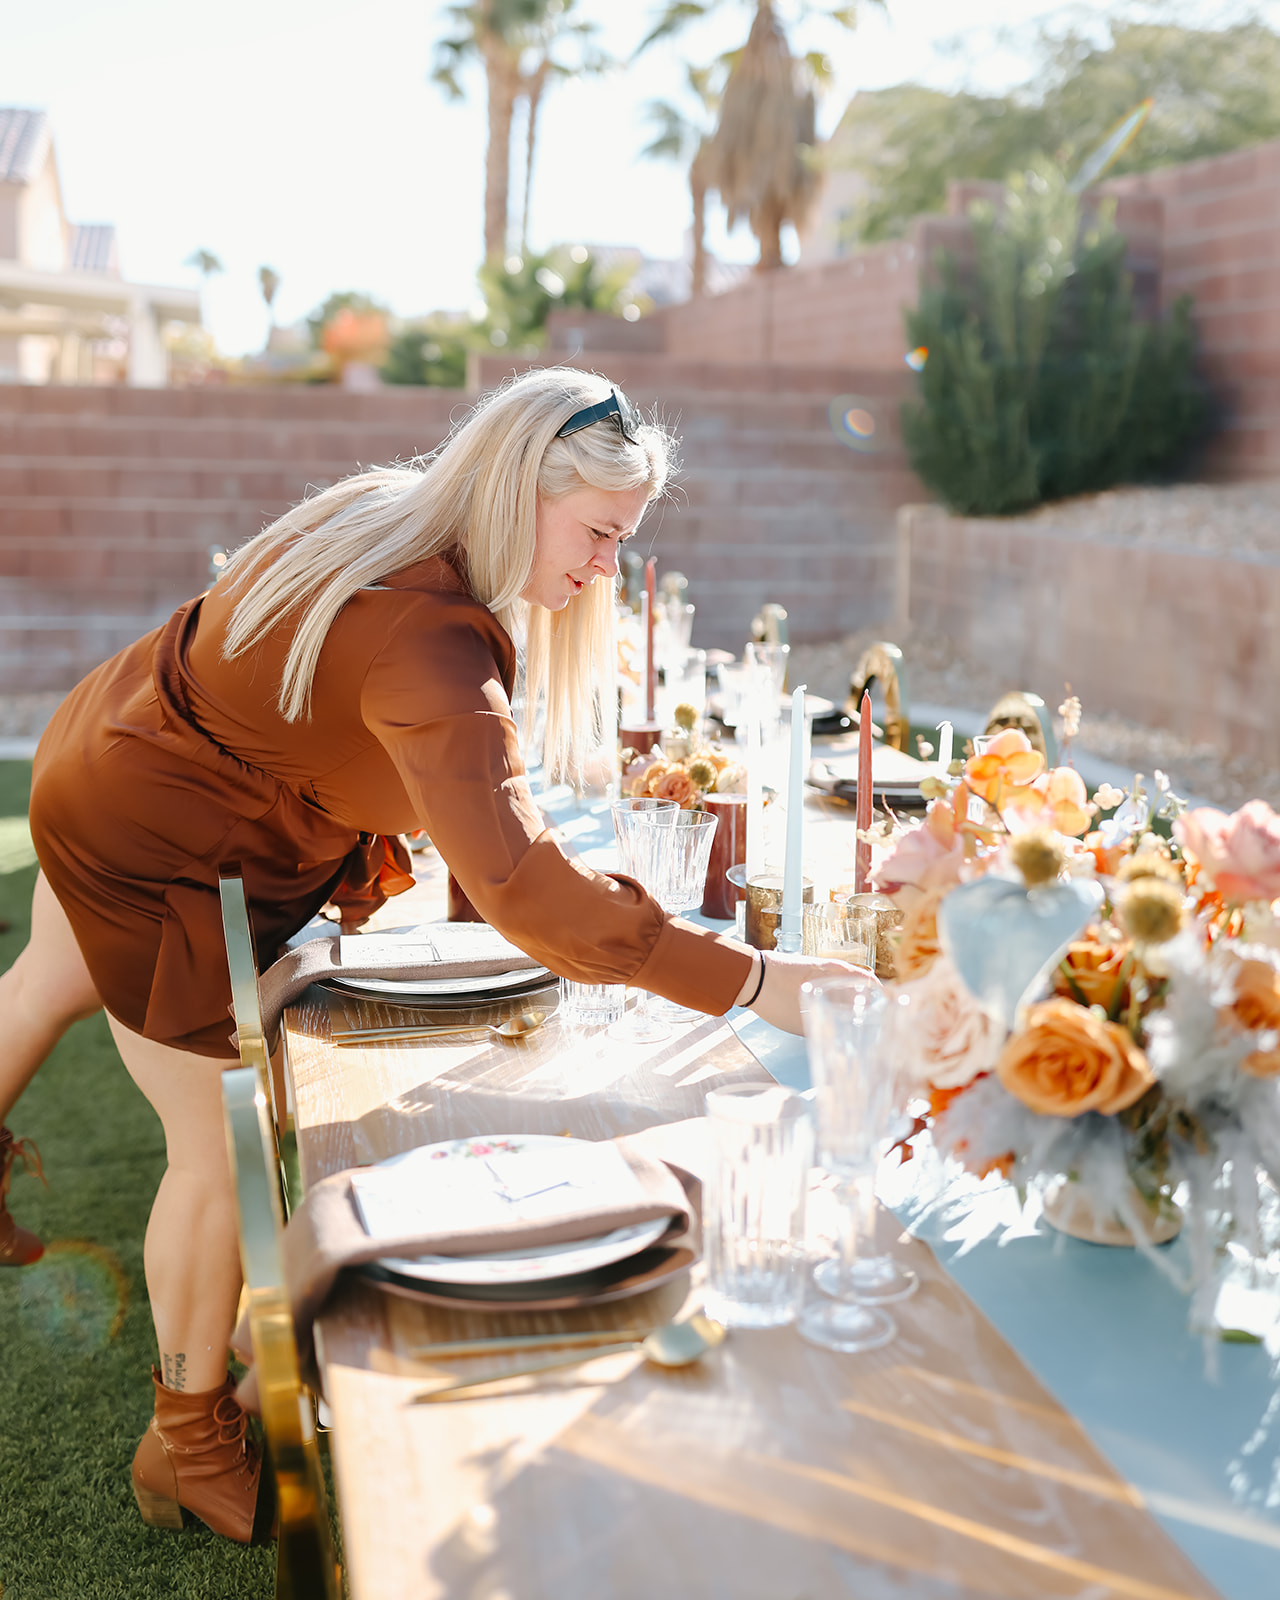 A person with long hair decorates an outdoor table set with plates, glasses, and a floral centerpiece in a sunny garden area for Thanksgiving dinner